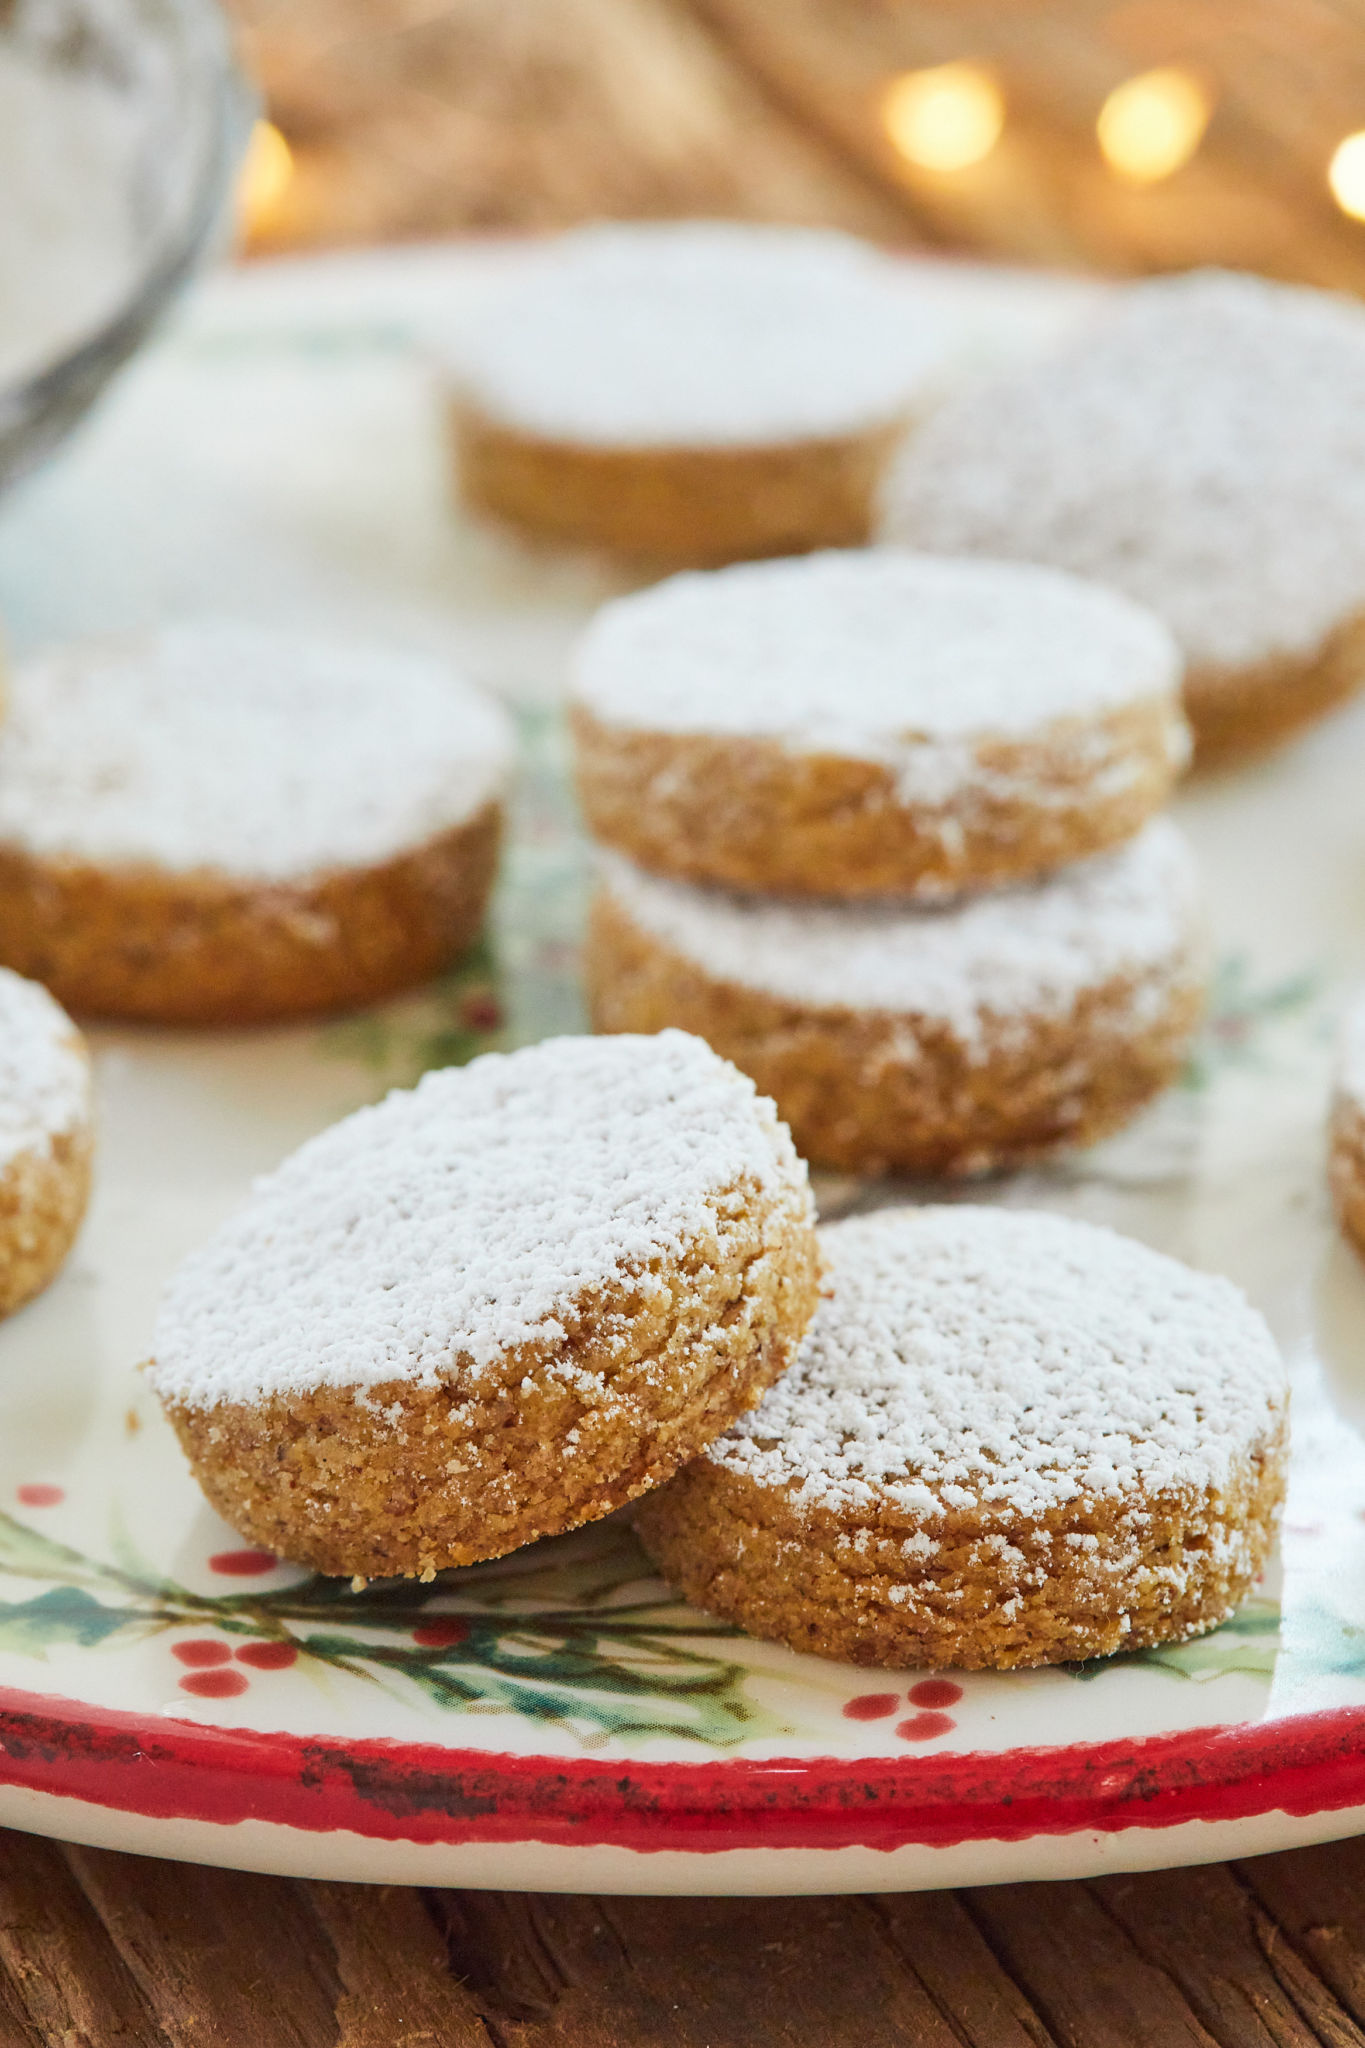 A plate of Spanish Almond Cookies dusted with powdered sugar.